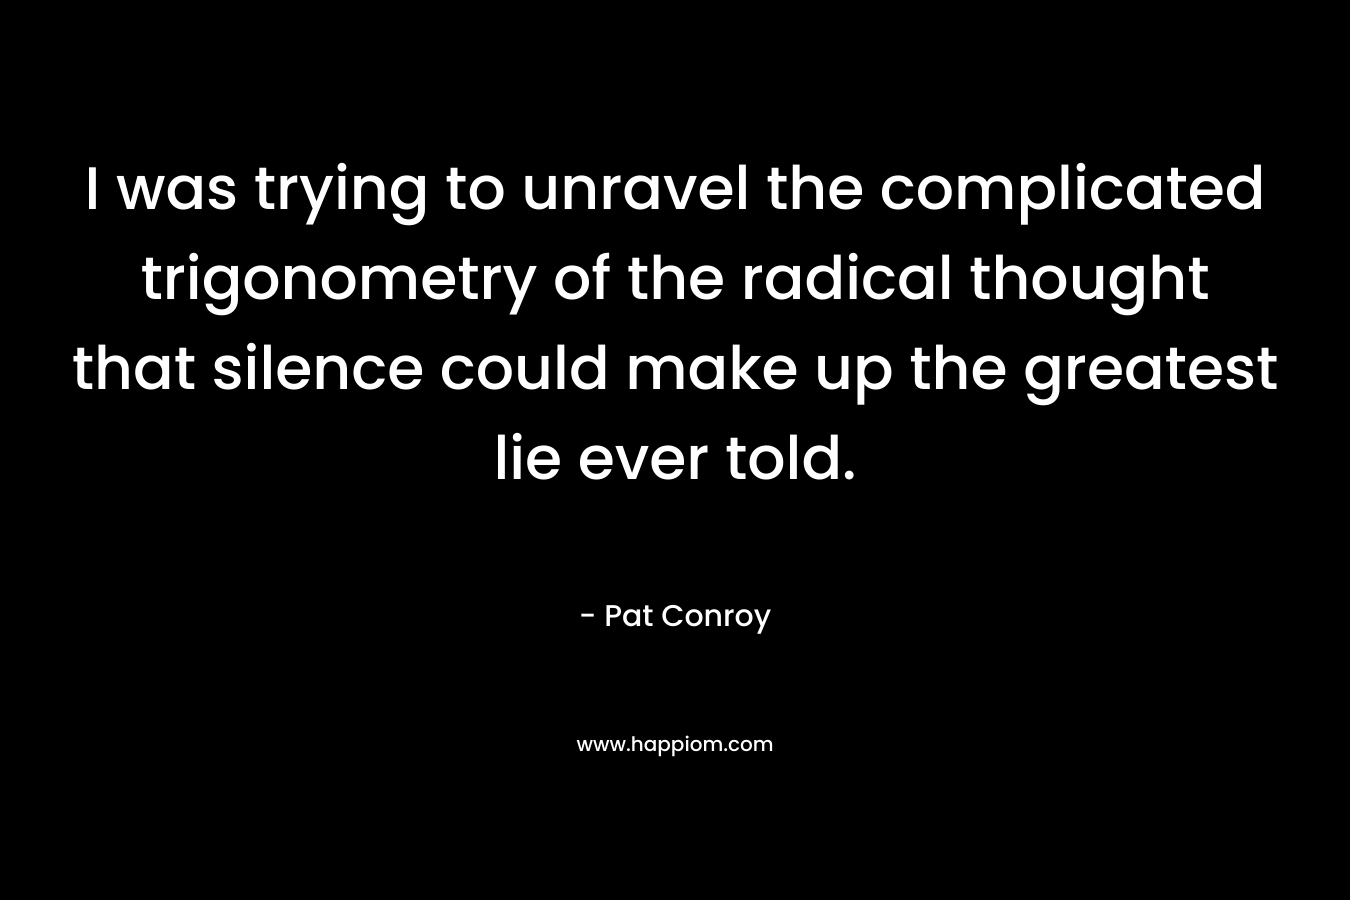 I was trying to unravel the complicated trigonometry of the radical thought that silence could make up the greatest lie ever told. – Pat Conroy